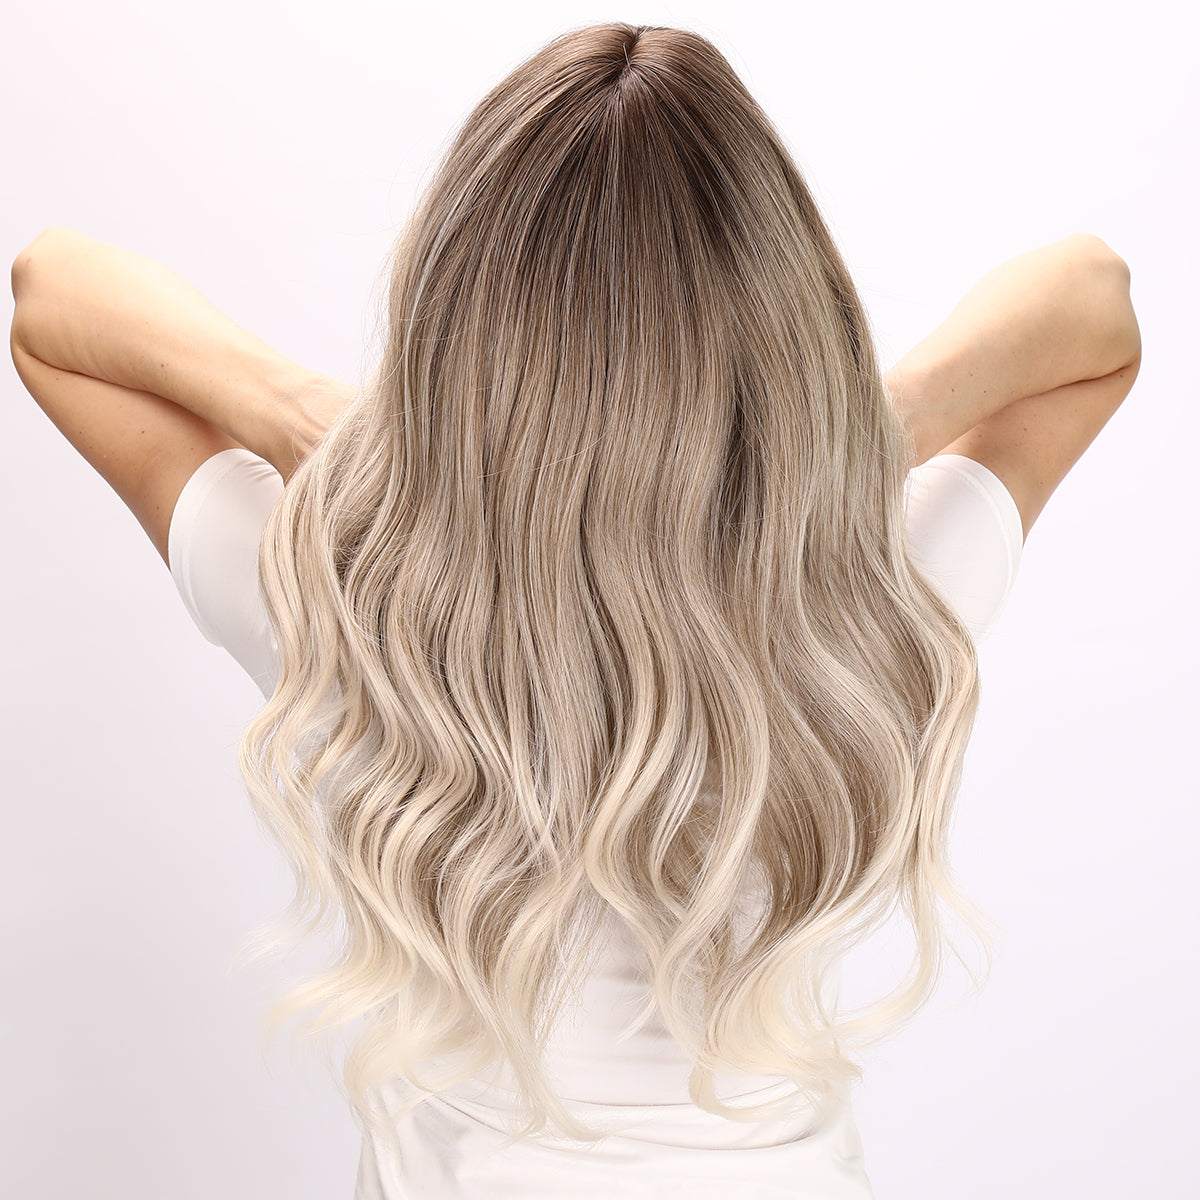 [Tori] 24-inch Ombre Gold Loose Wave with Bangs (Synthetic Wig)